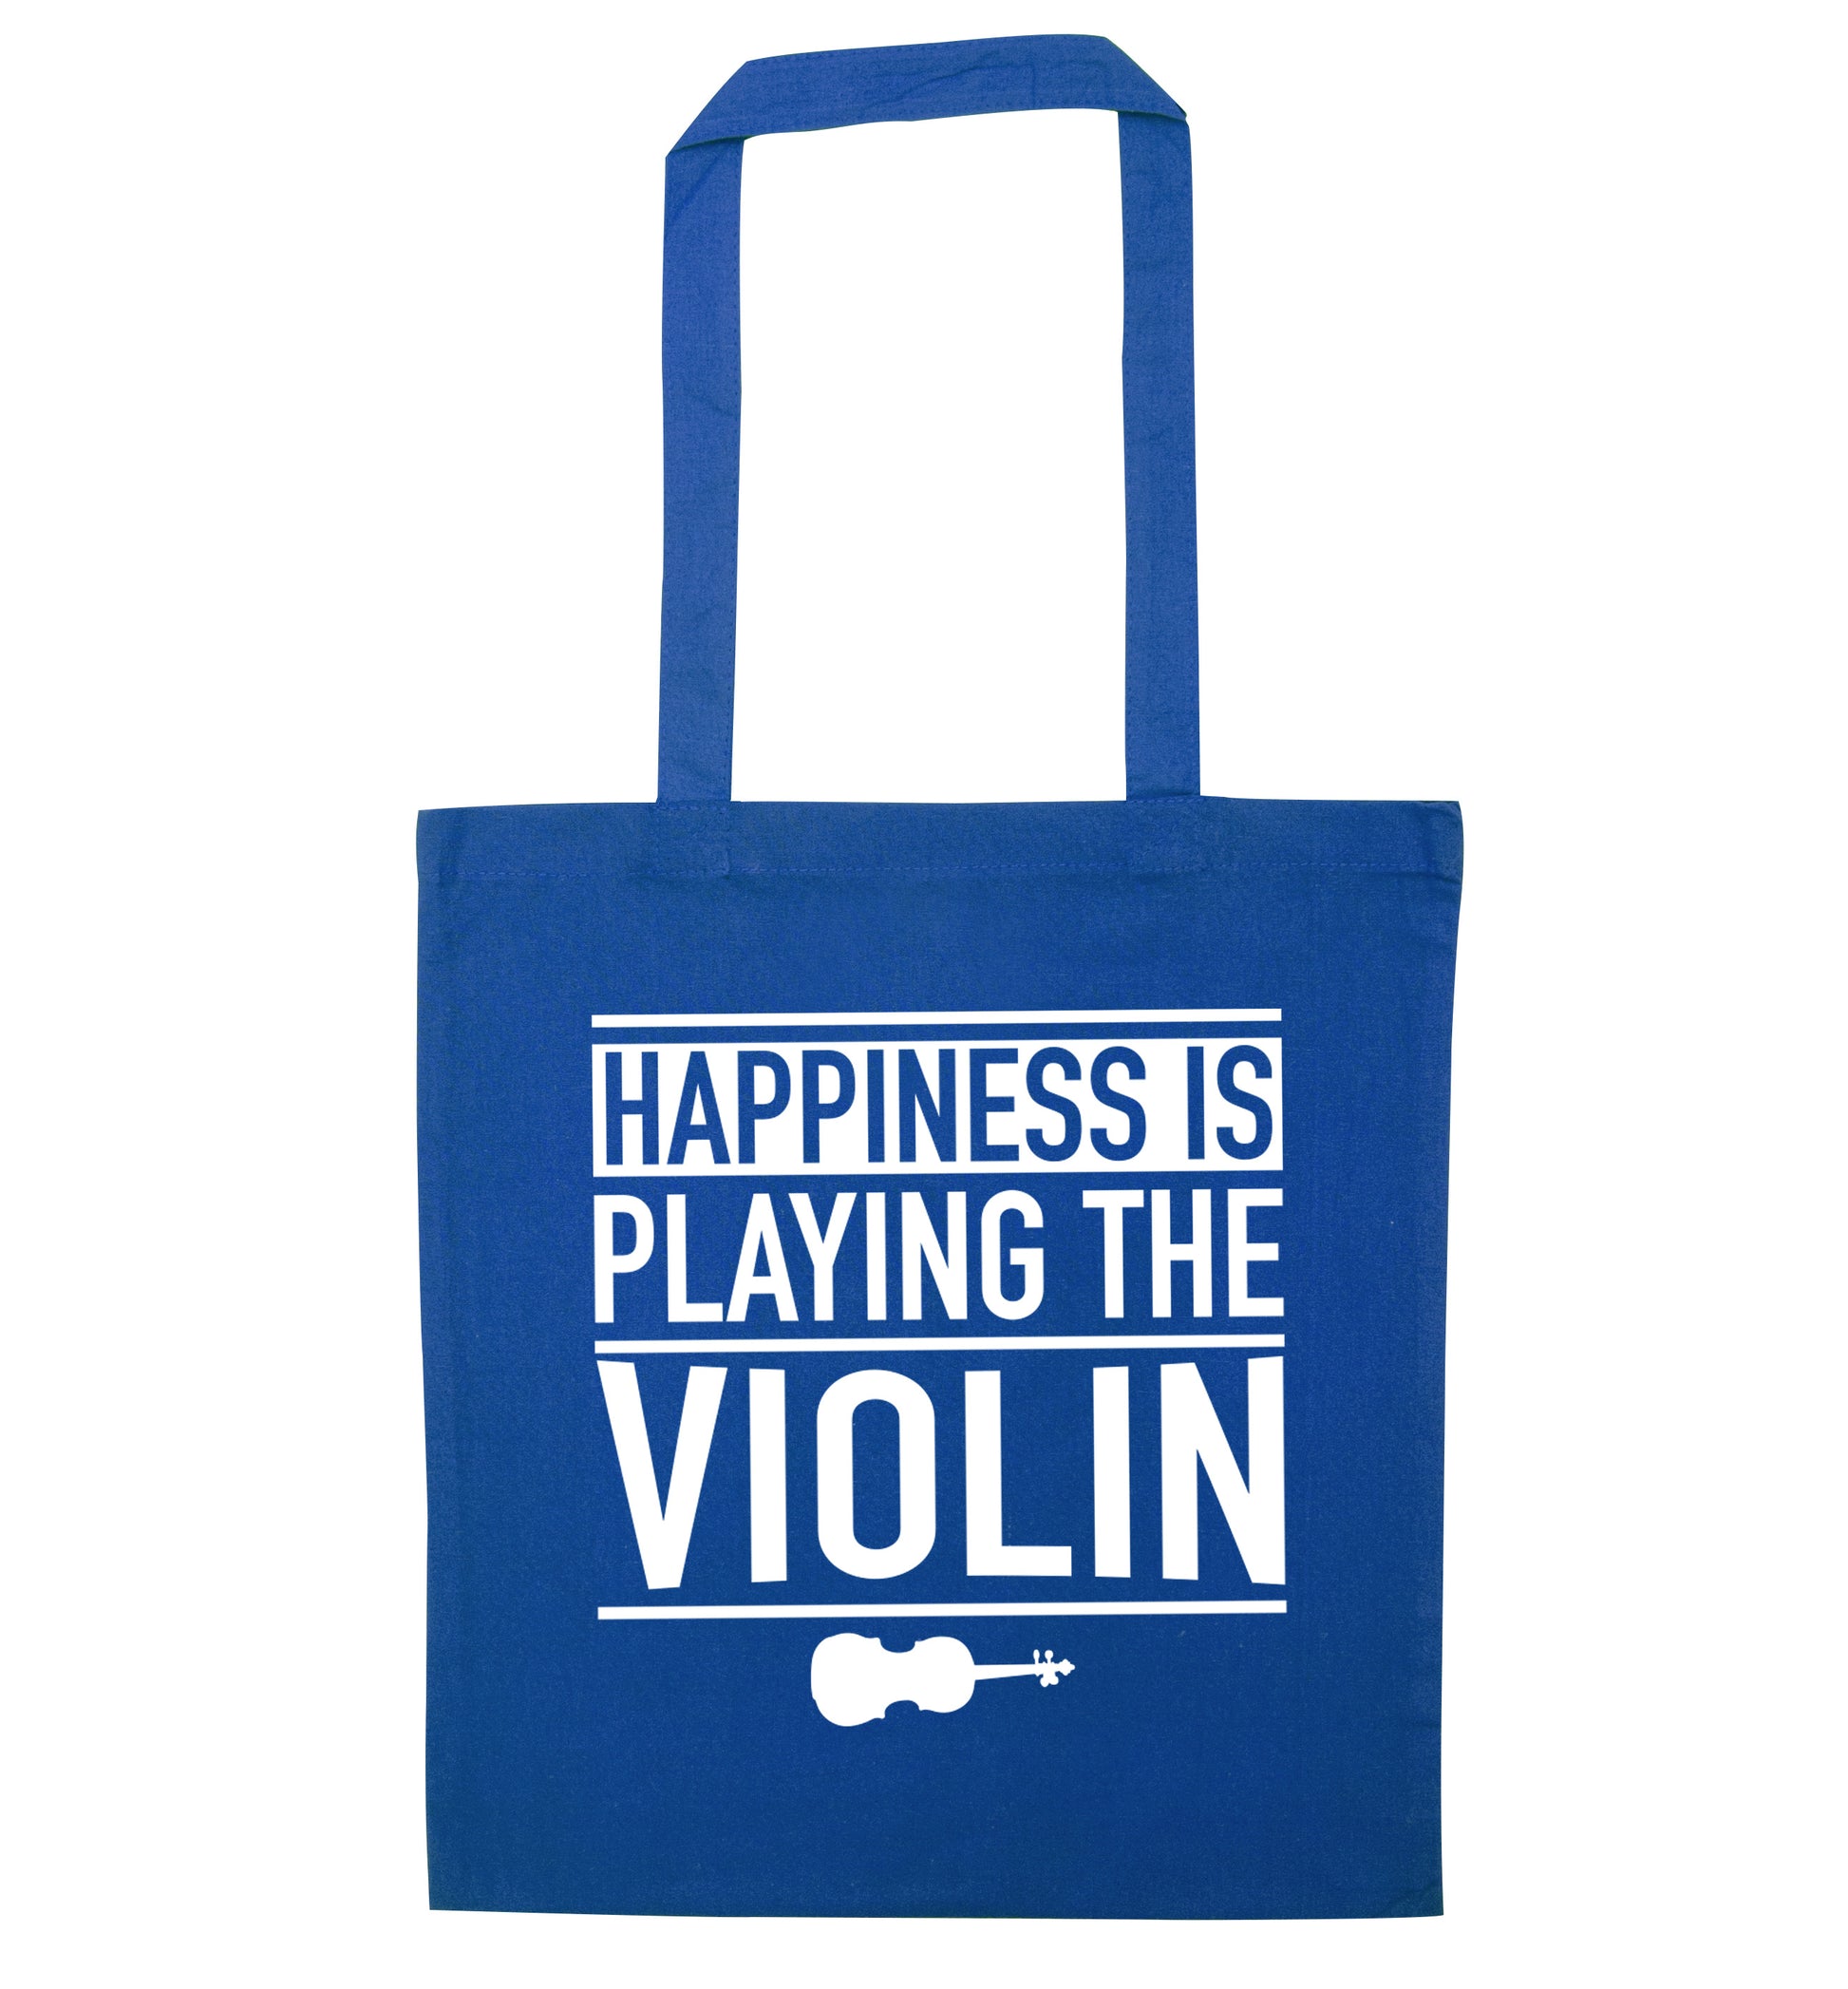 Happiness is playing the violin blue tote bag